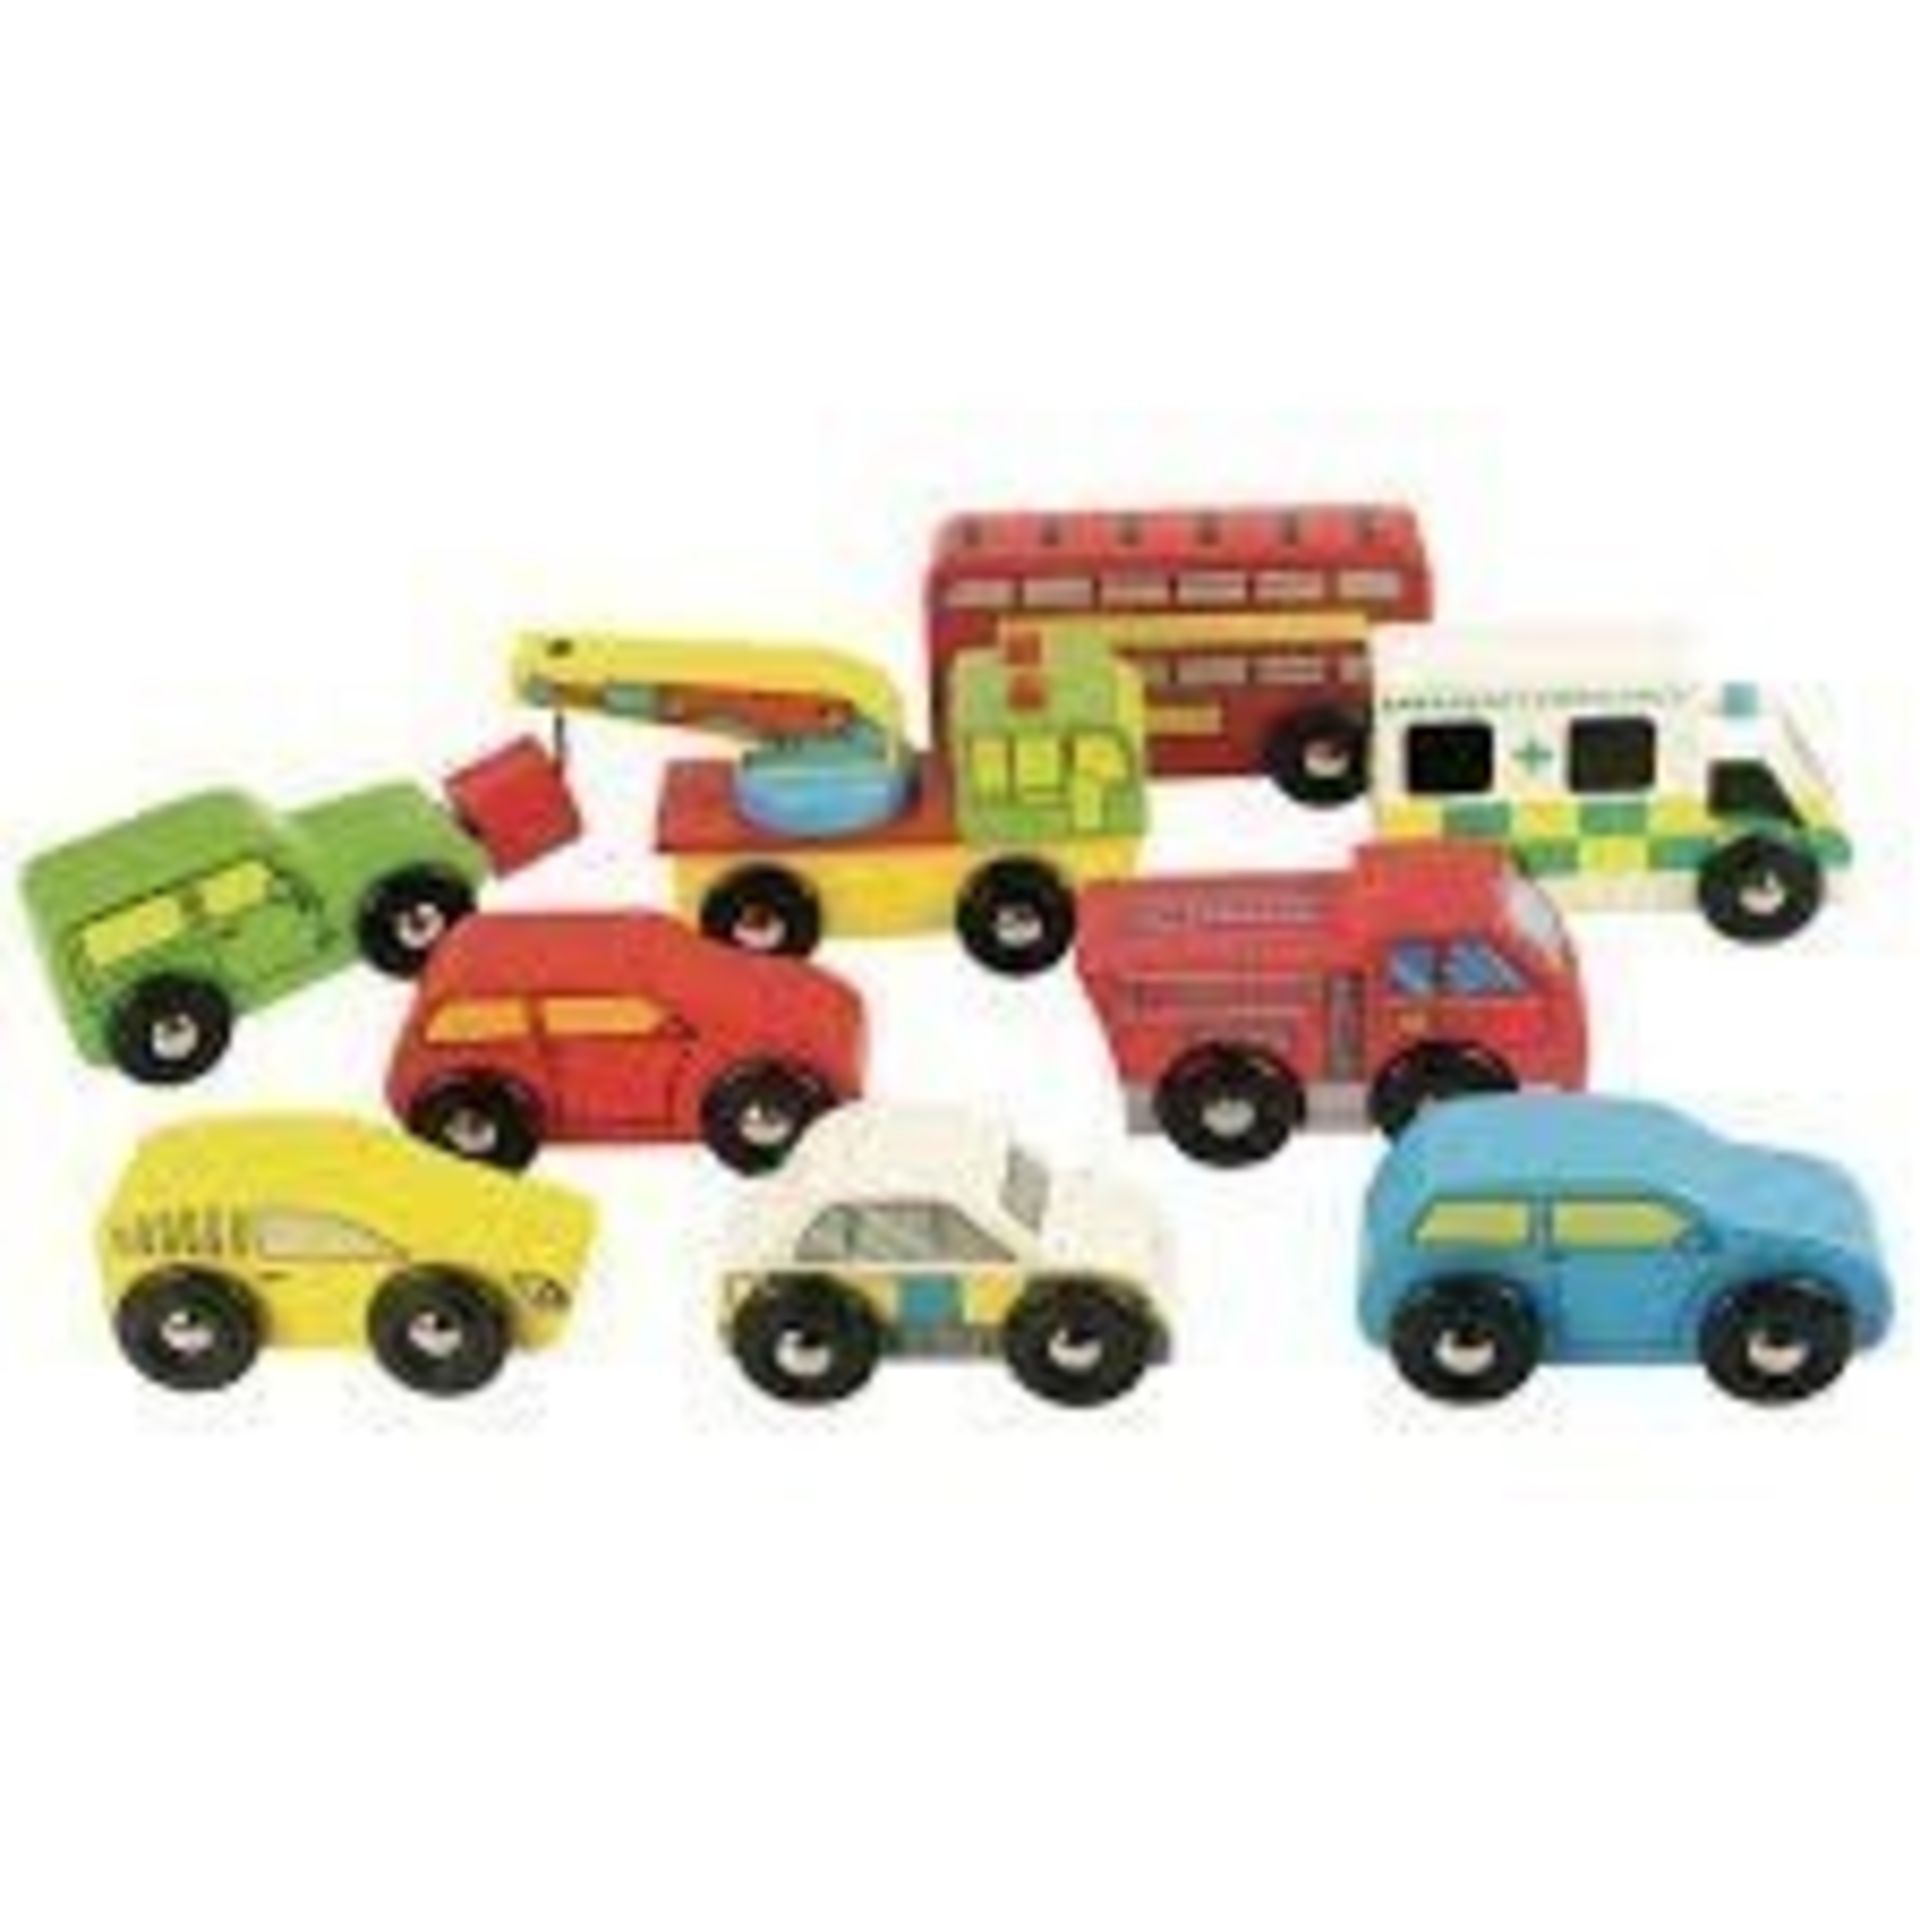 Lot To Contain 6 Sets Of 4 My First Emergency Vehicles Wooden Children's Play Sets Combined RRP £120